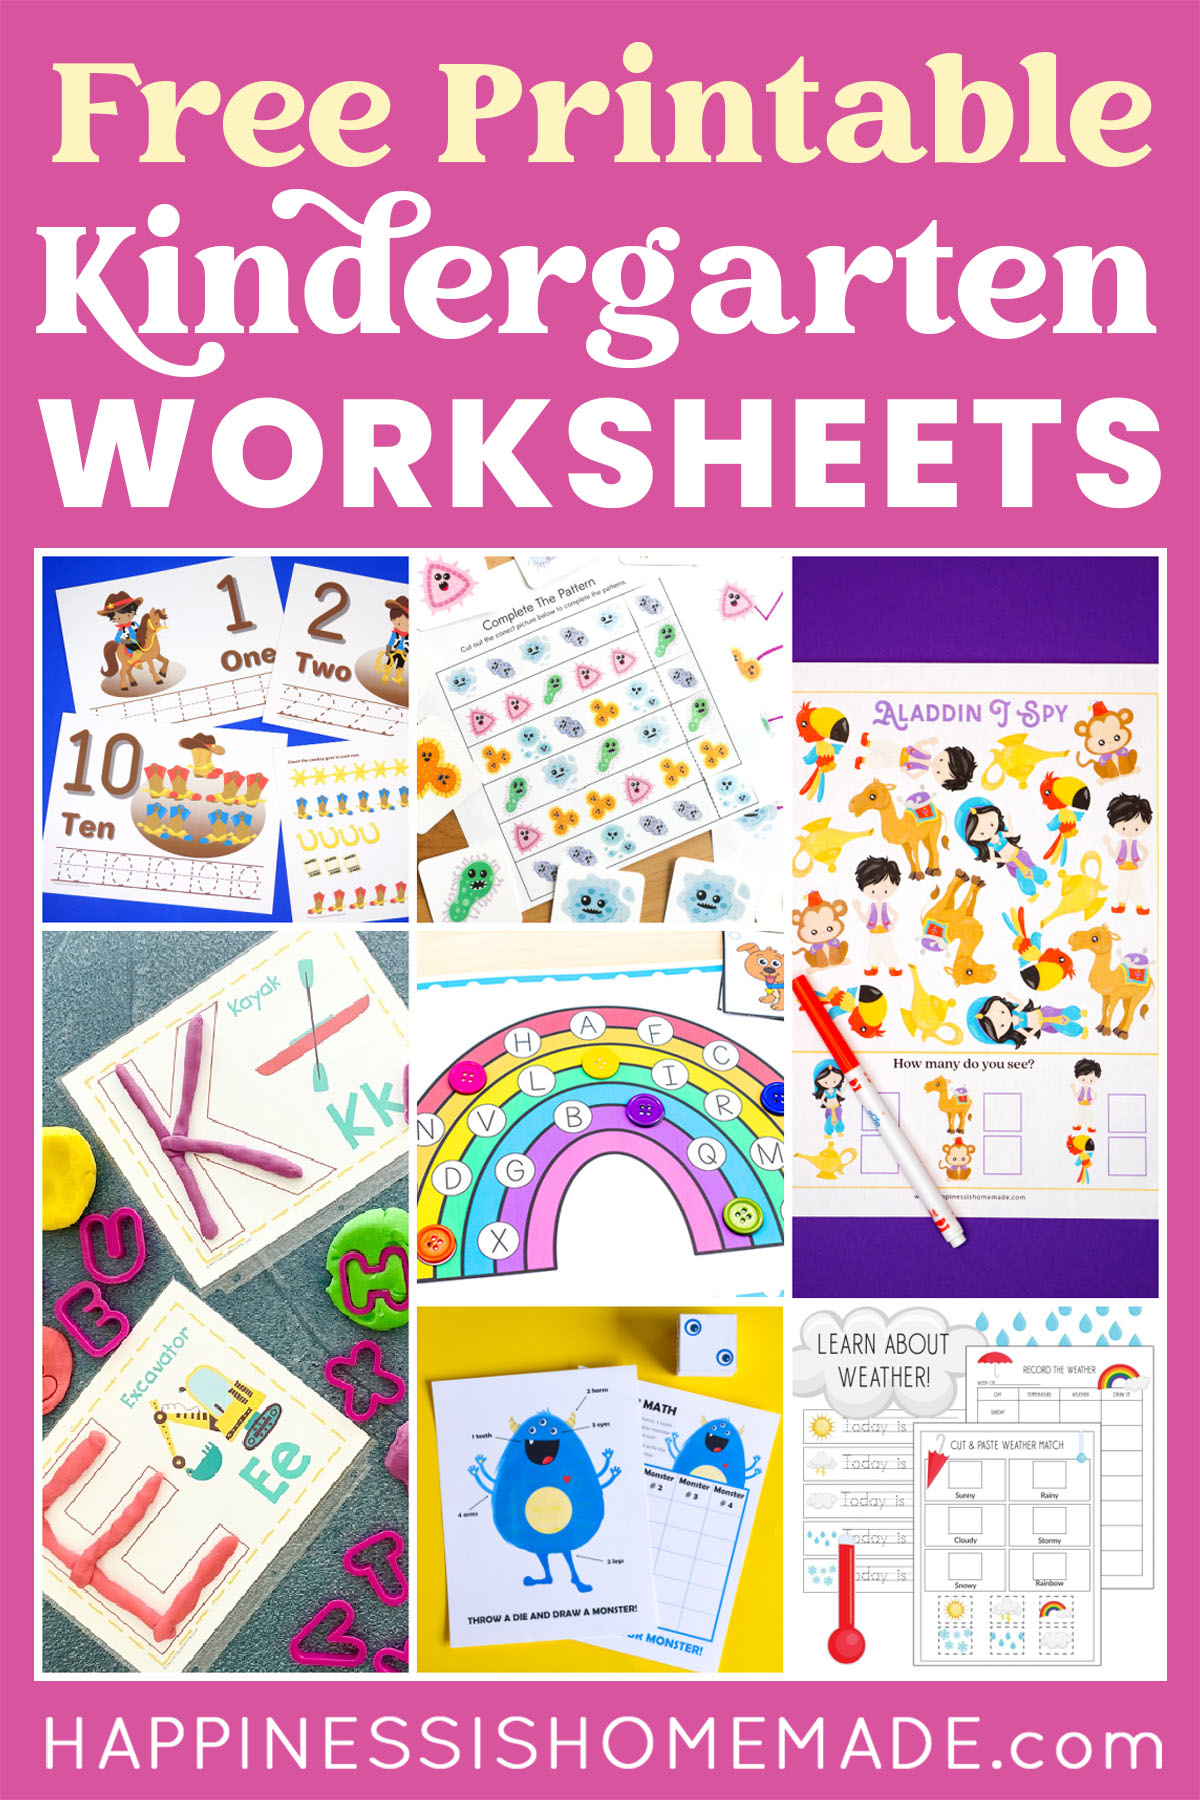 The Pieces of Me Worksheet - Getting to Know You Activity